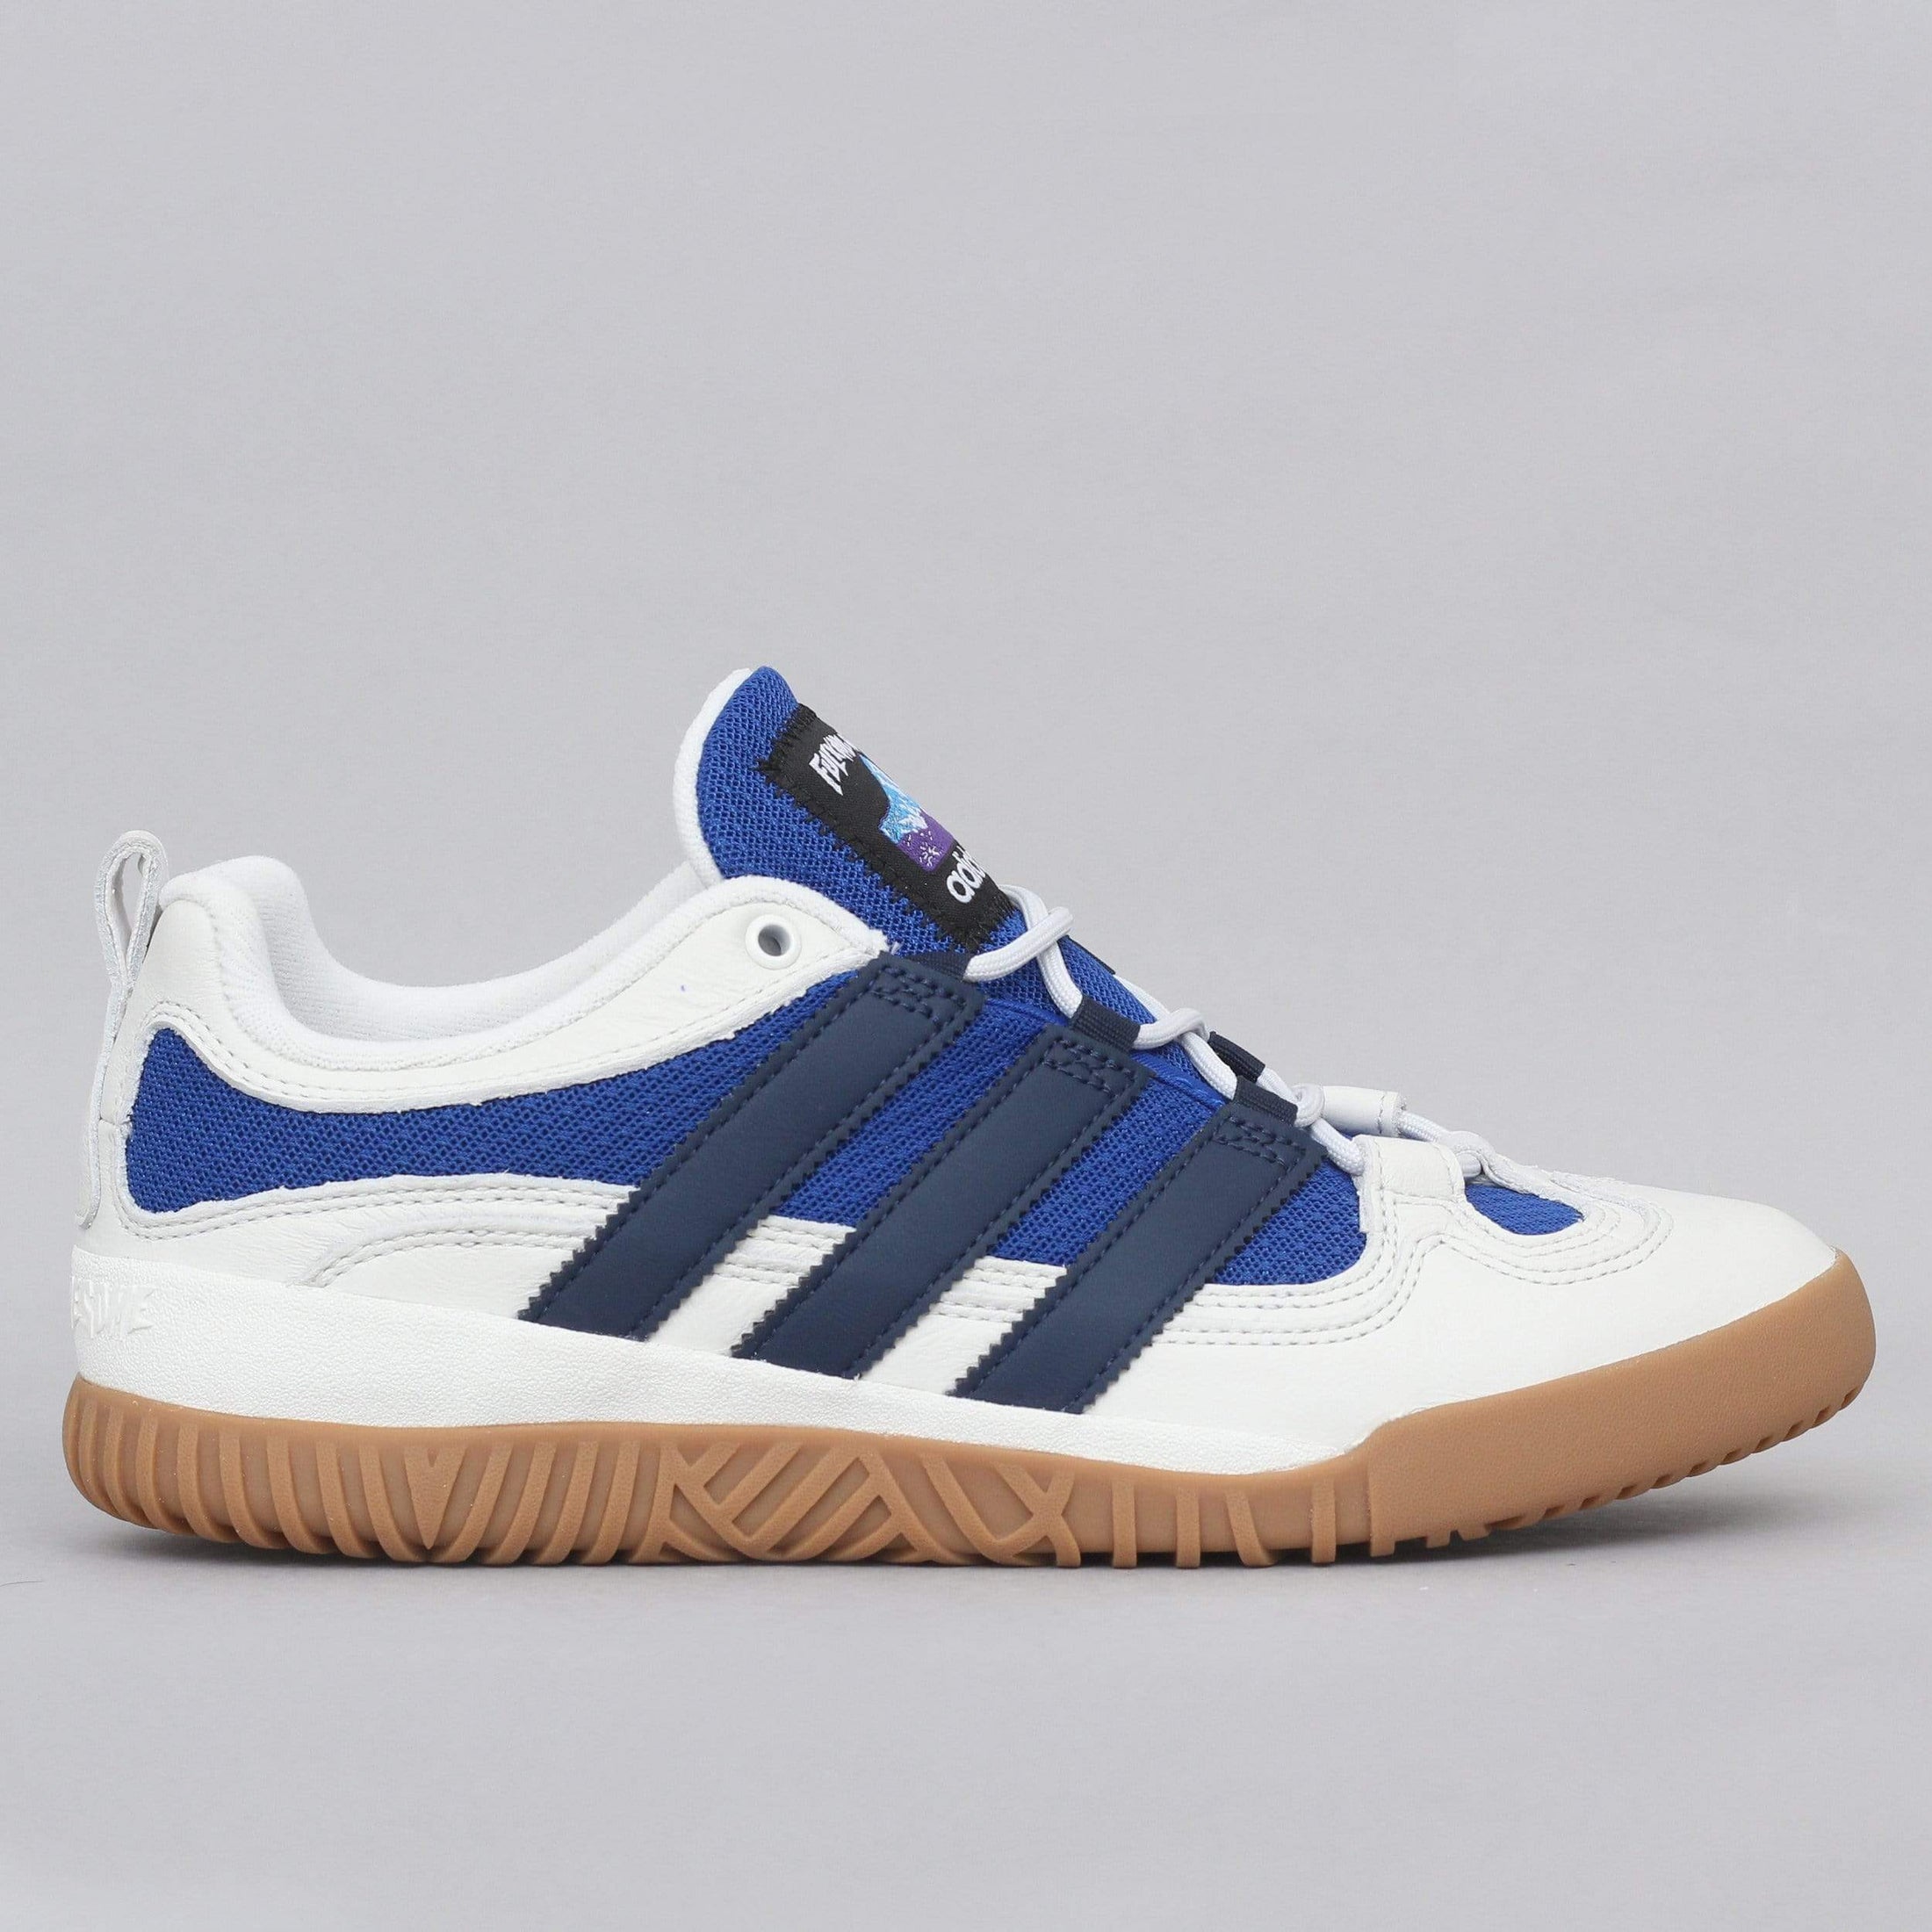 adidas FA Experiment 1 Shoes Crystal White / Collegiate Navy / Collegiate Royal